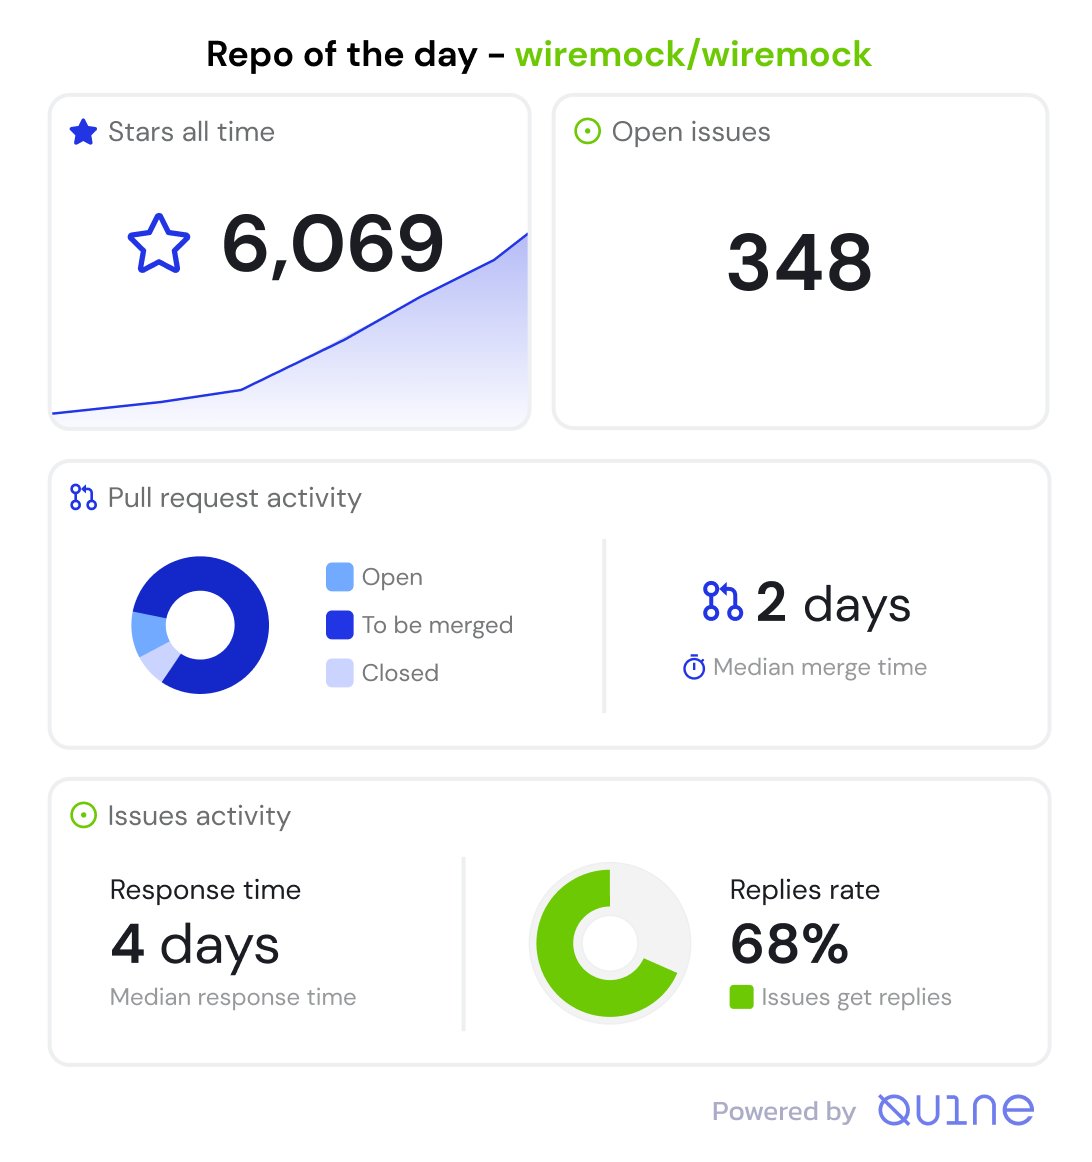 Your contribution for the evening 🌝: WireMock👇 Co-founded by @UMaoz and @TomAkehurst, @wiremockorg is a flexible platform that enables developers to mock APIs for use in unit, integration development and performance testing when internal or external 3rd party services aren't…